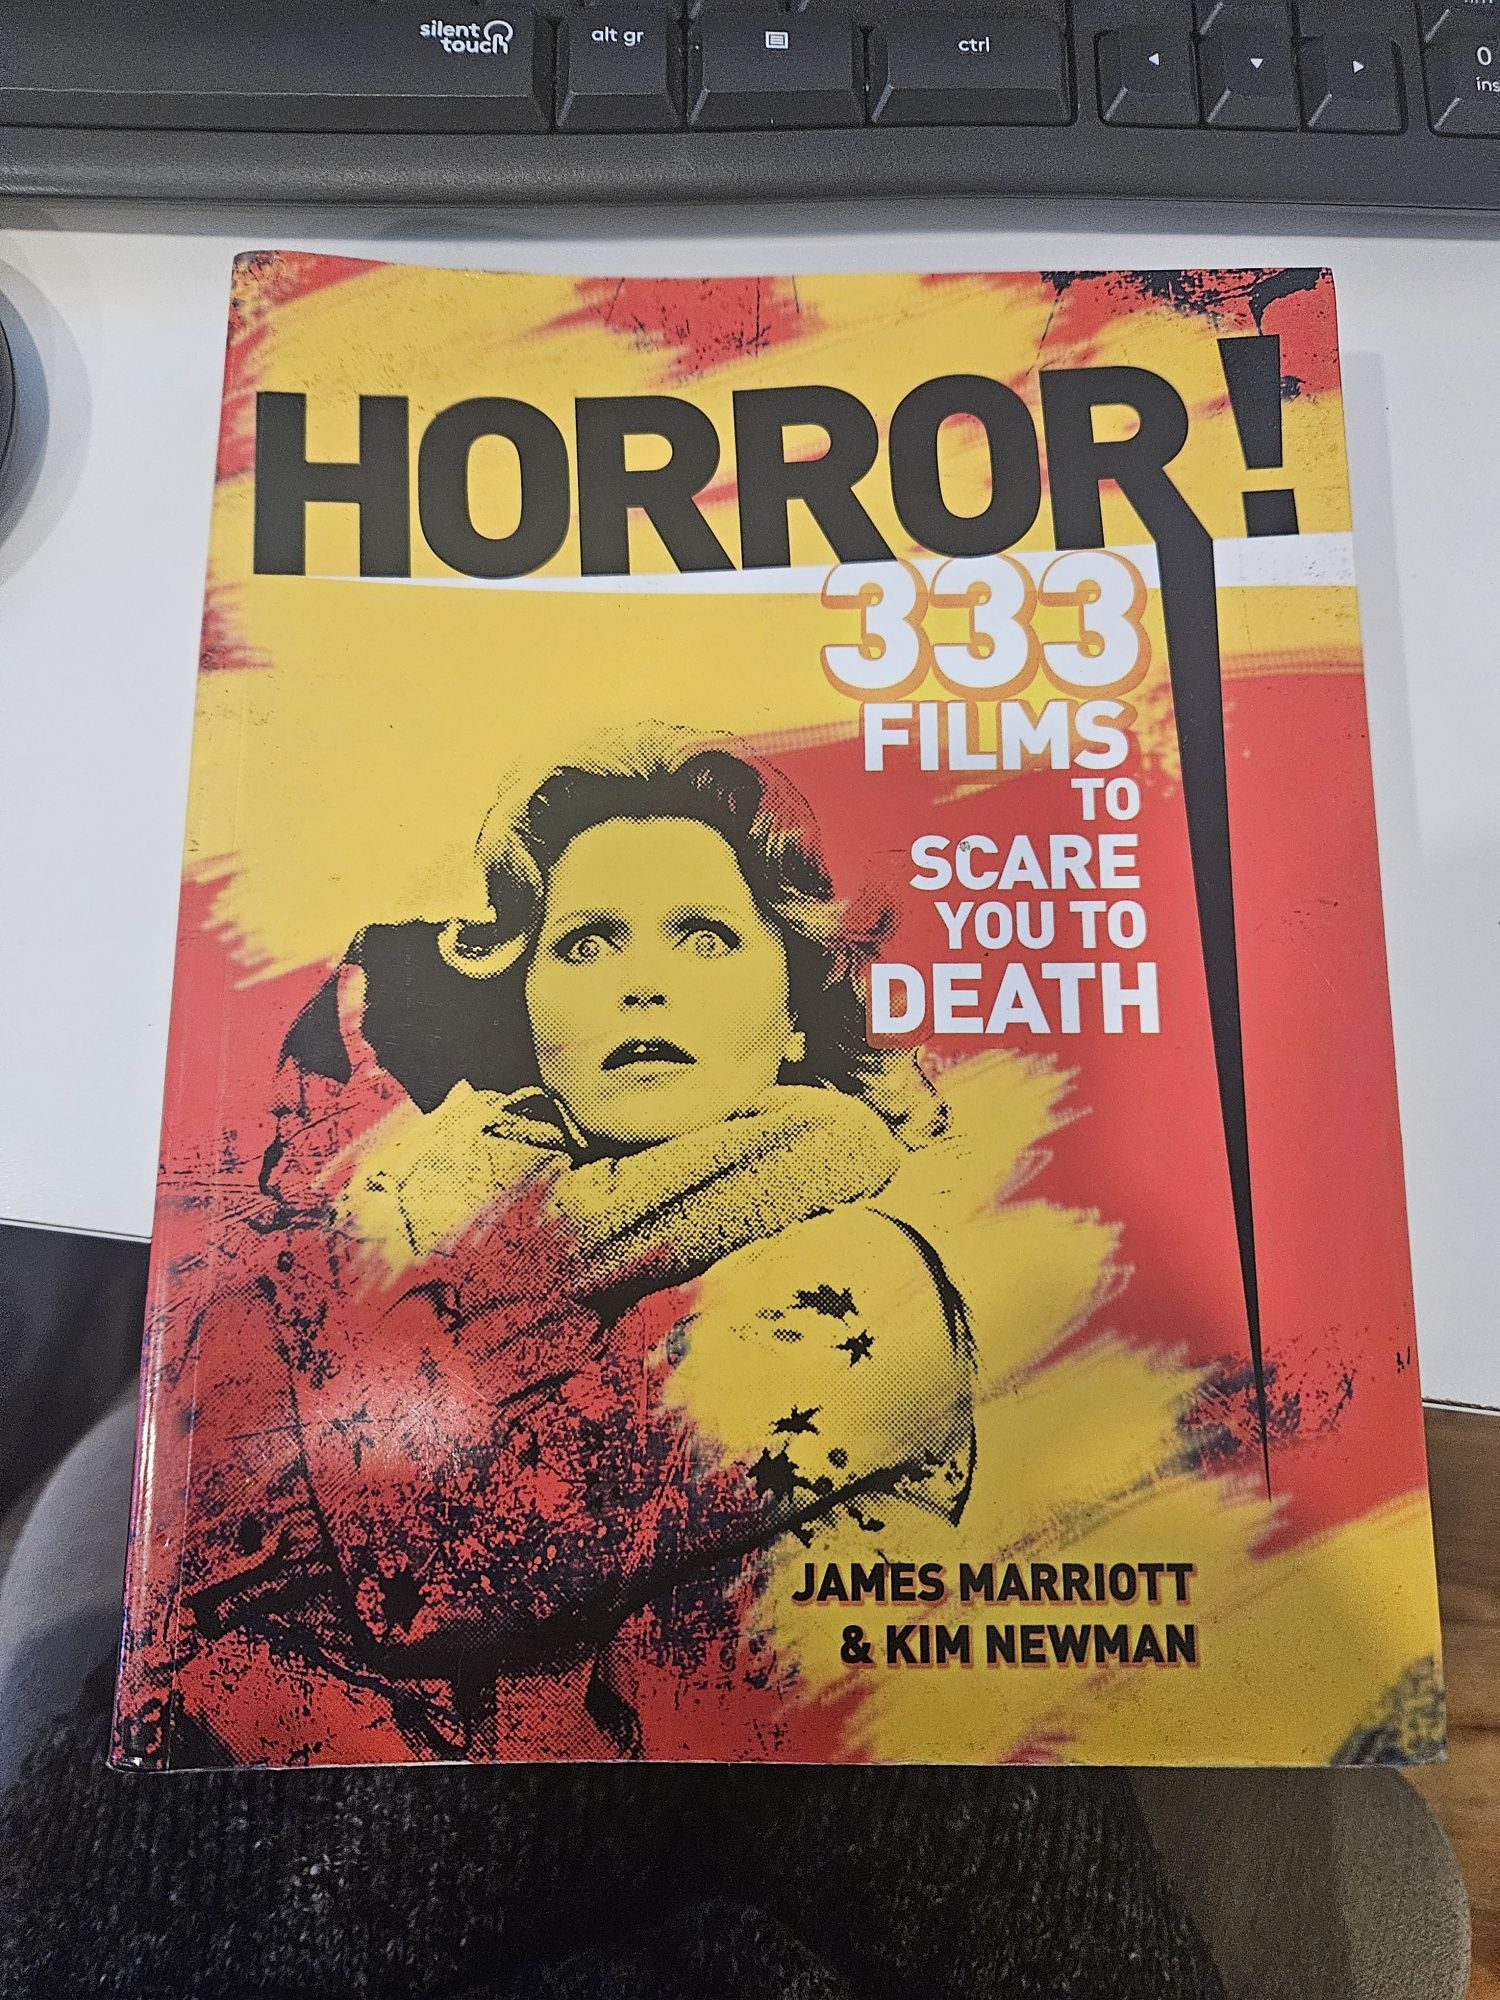 Livro "Horror- 333 films to scare you to death